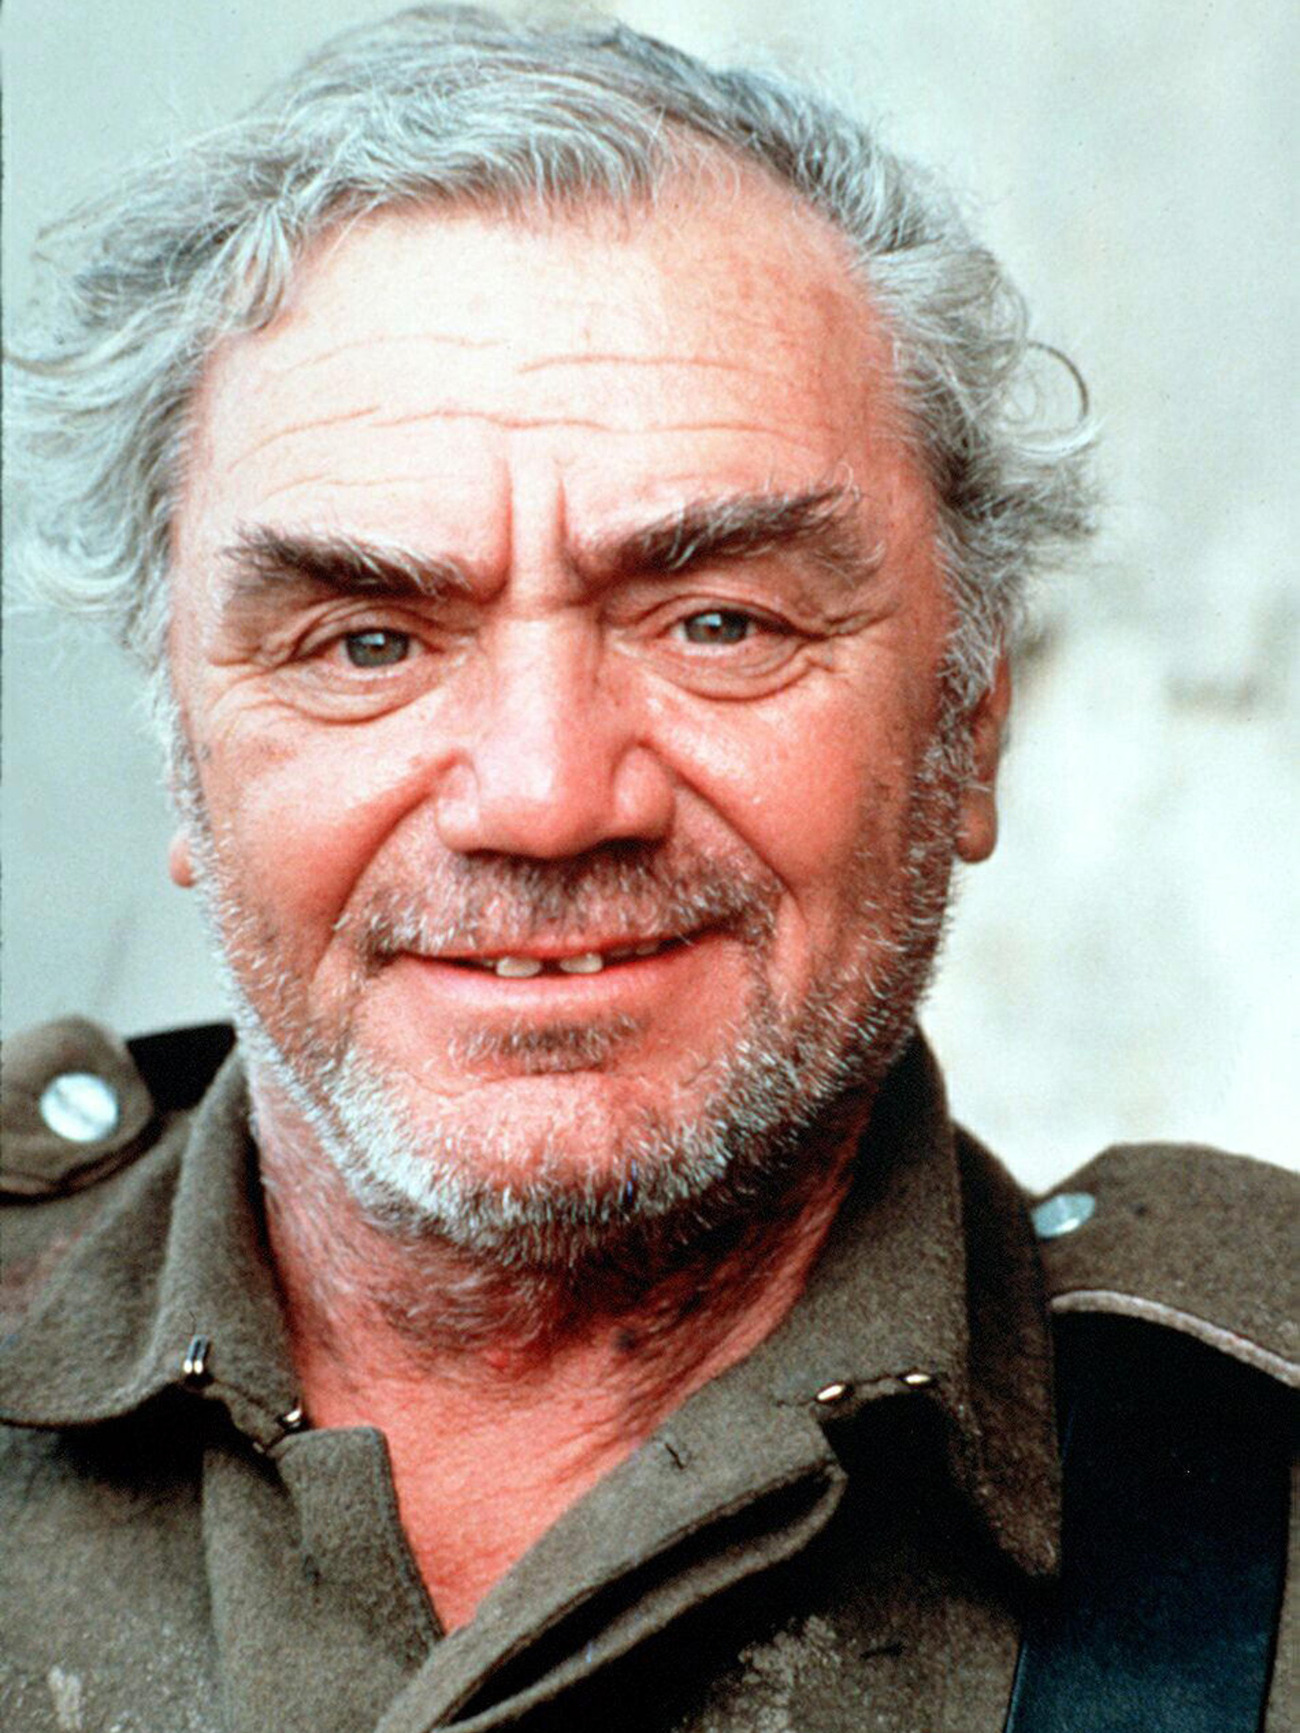 Ernest Borgnine List of Movies and TV Shows | TV Guide